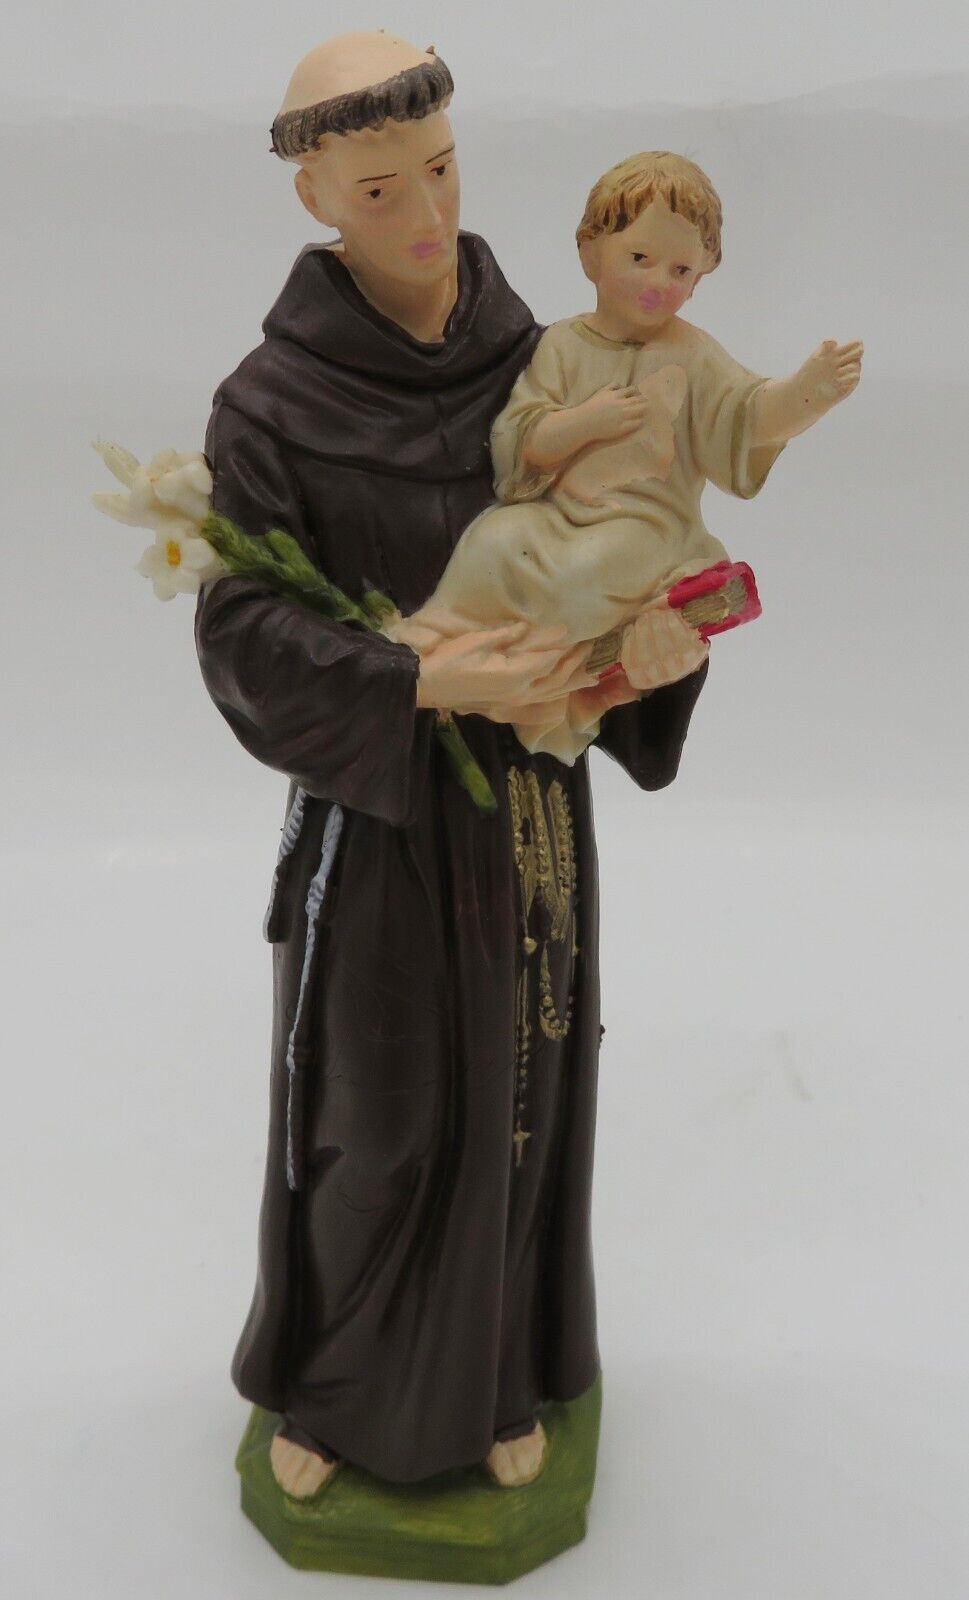 Vintage St. Anthony w/ Child Figurine Hand Painted in Italy by Pasquini